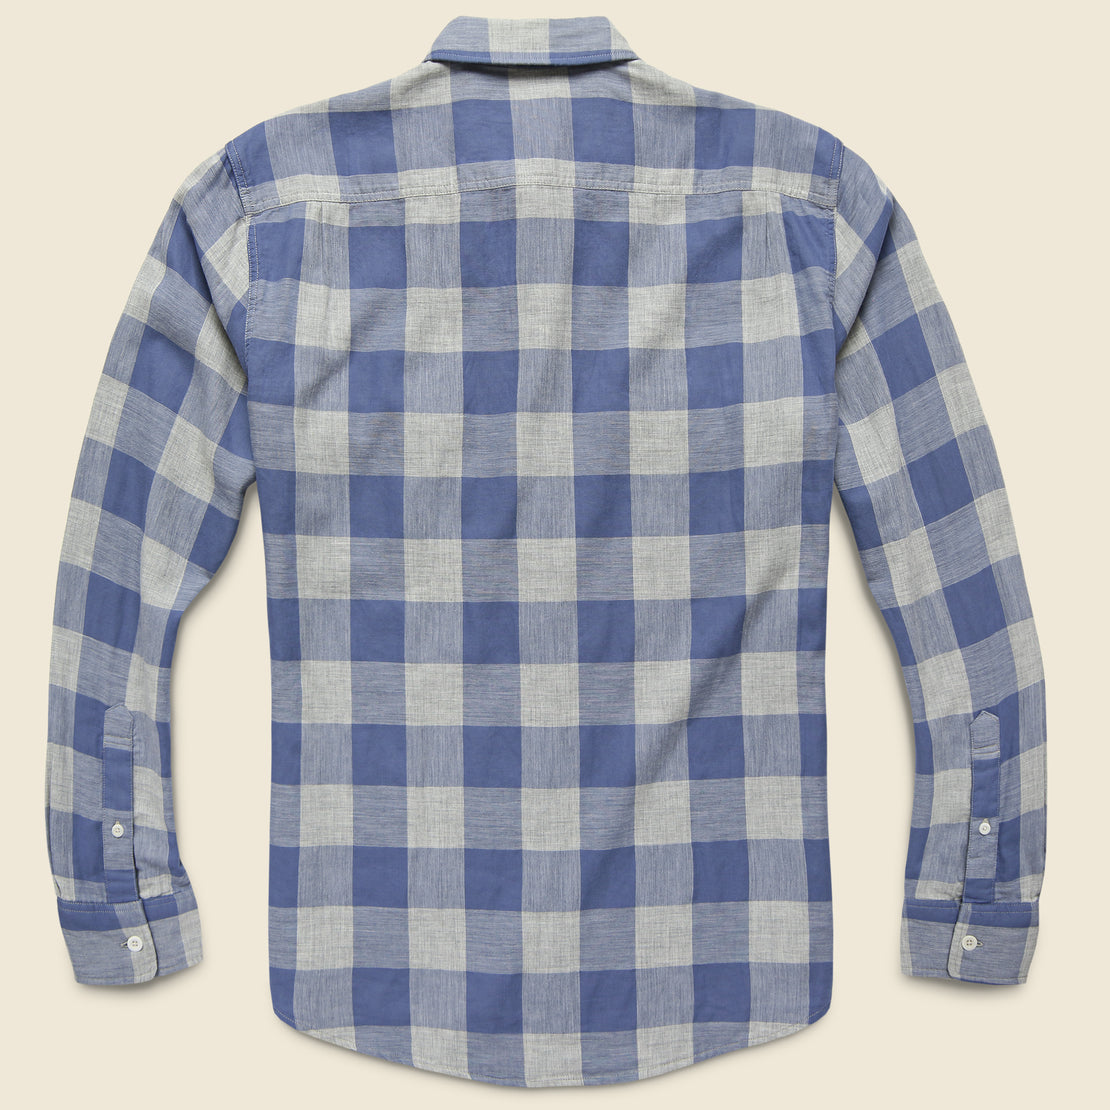 Belmar Workshirt - Grey Buffalo Check - Faherty - STAG Provisions - Tops - L/S Woven - Plaid